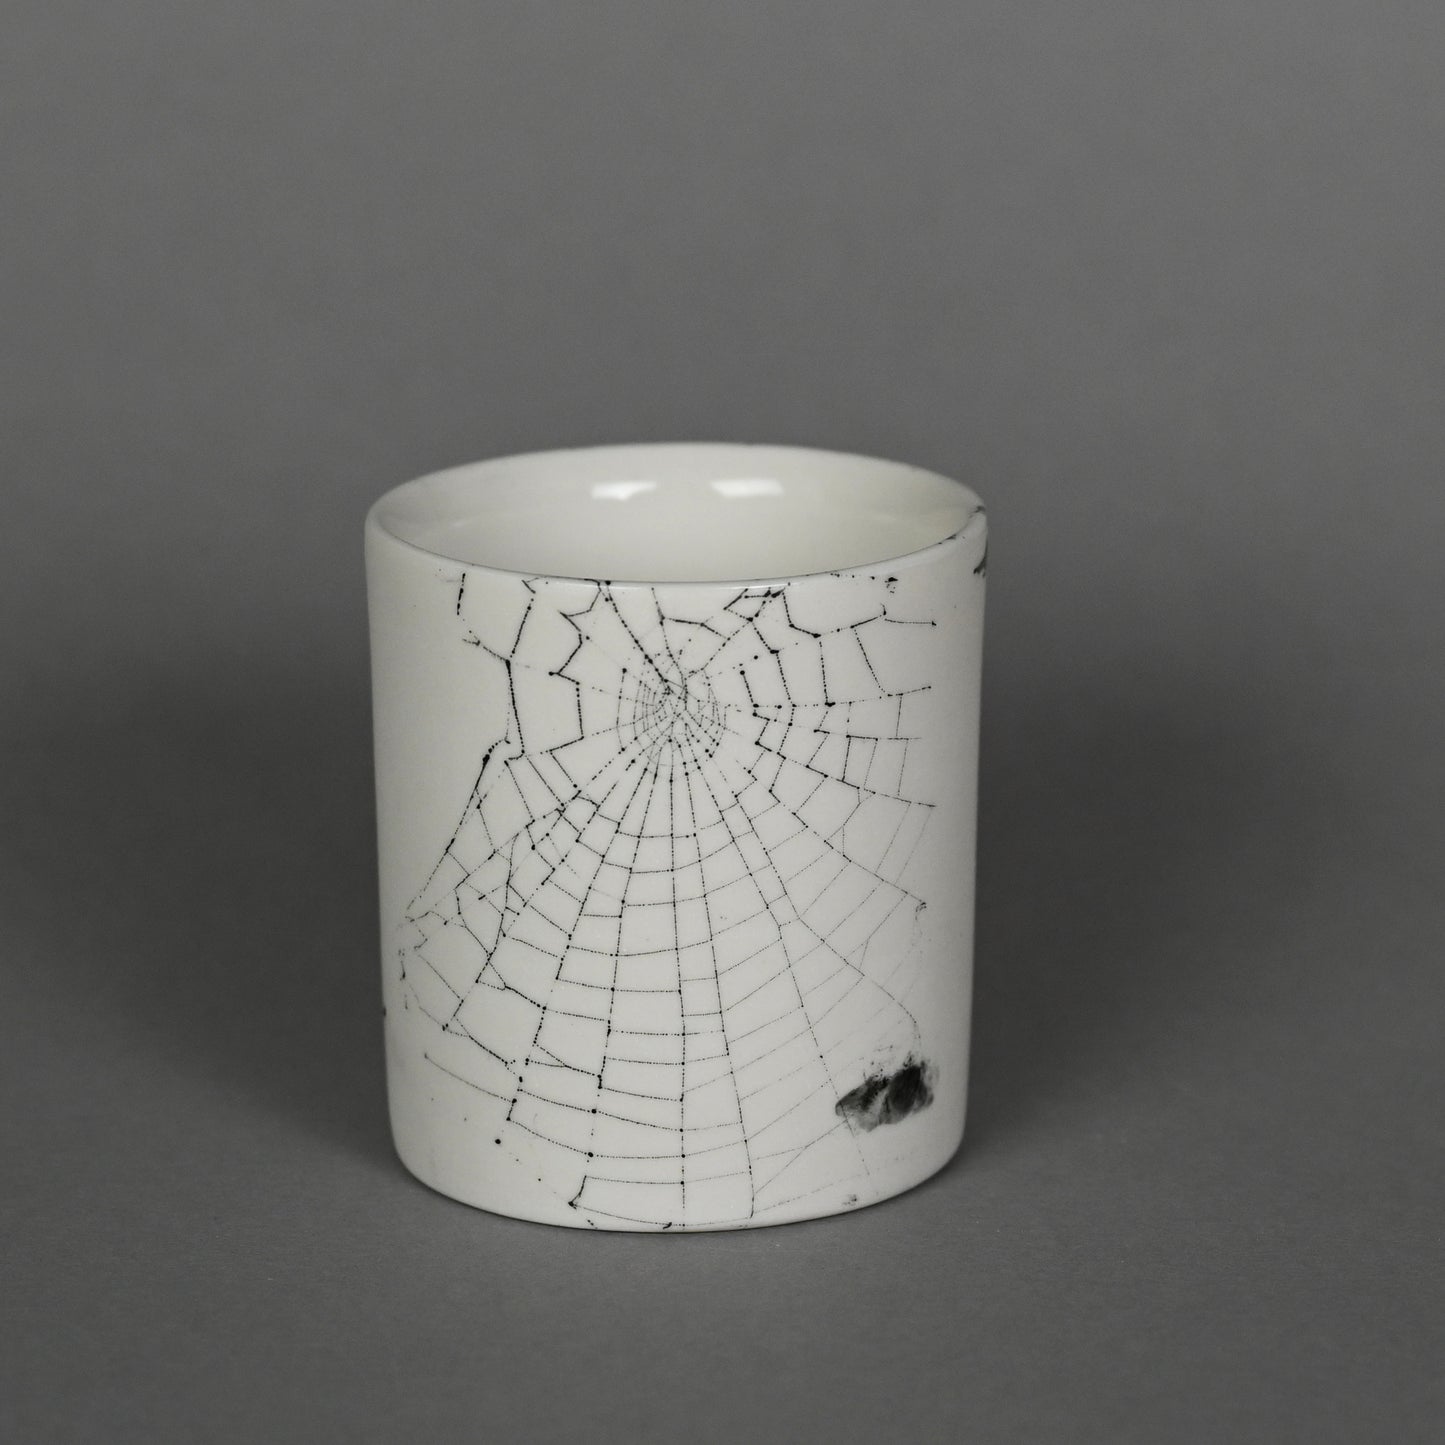 Web on Clay (217), Collected October 01, 2022